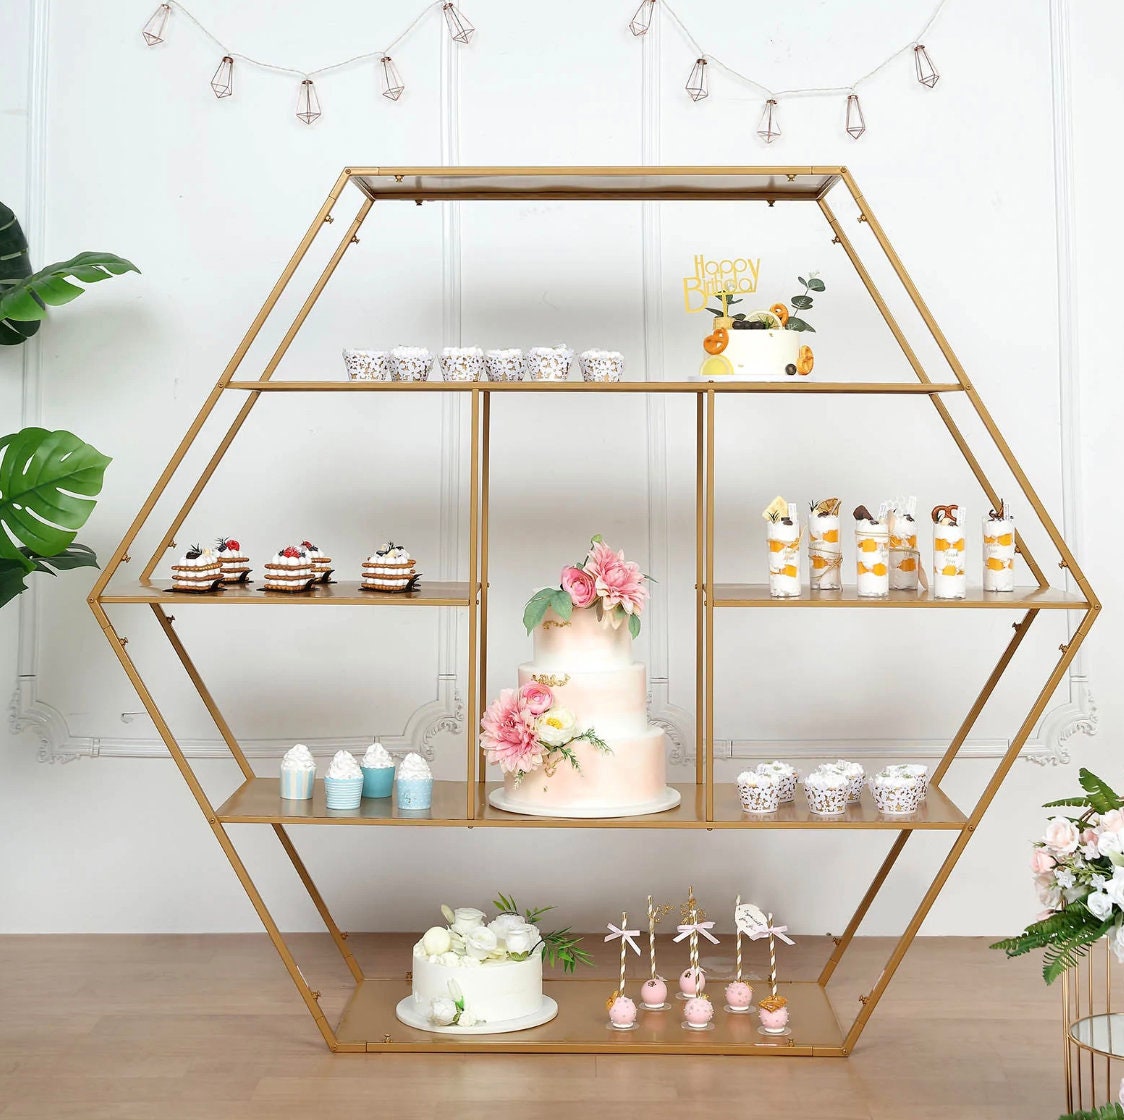 4 FT. Extra Large Gold Metal Tiered Dessert Shelf Display Rack Cake Stand Cupcake Holder Snack Sandwich Appetizer Party Decoration Geometric